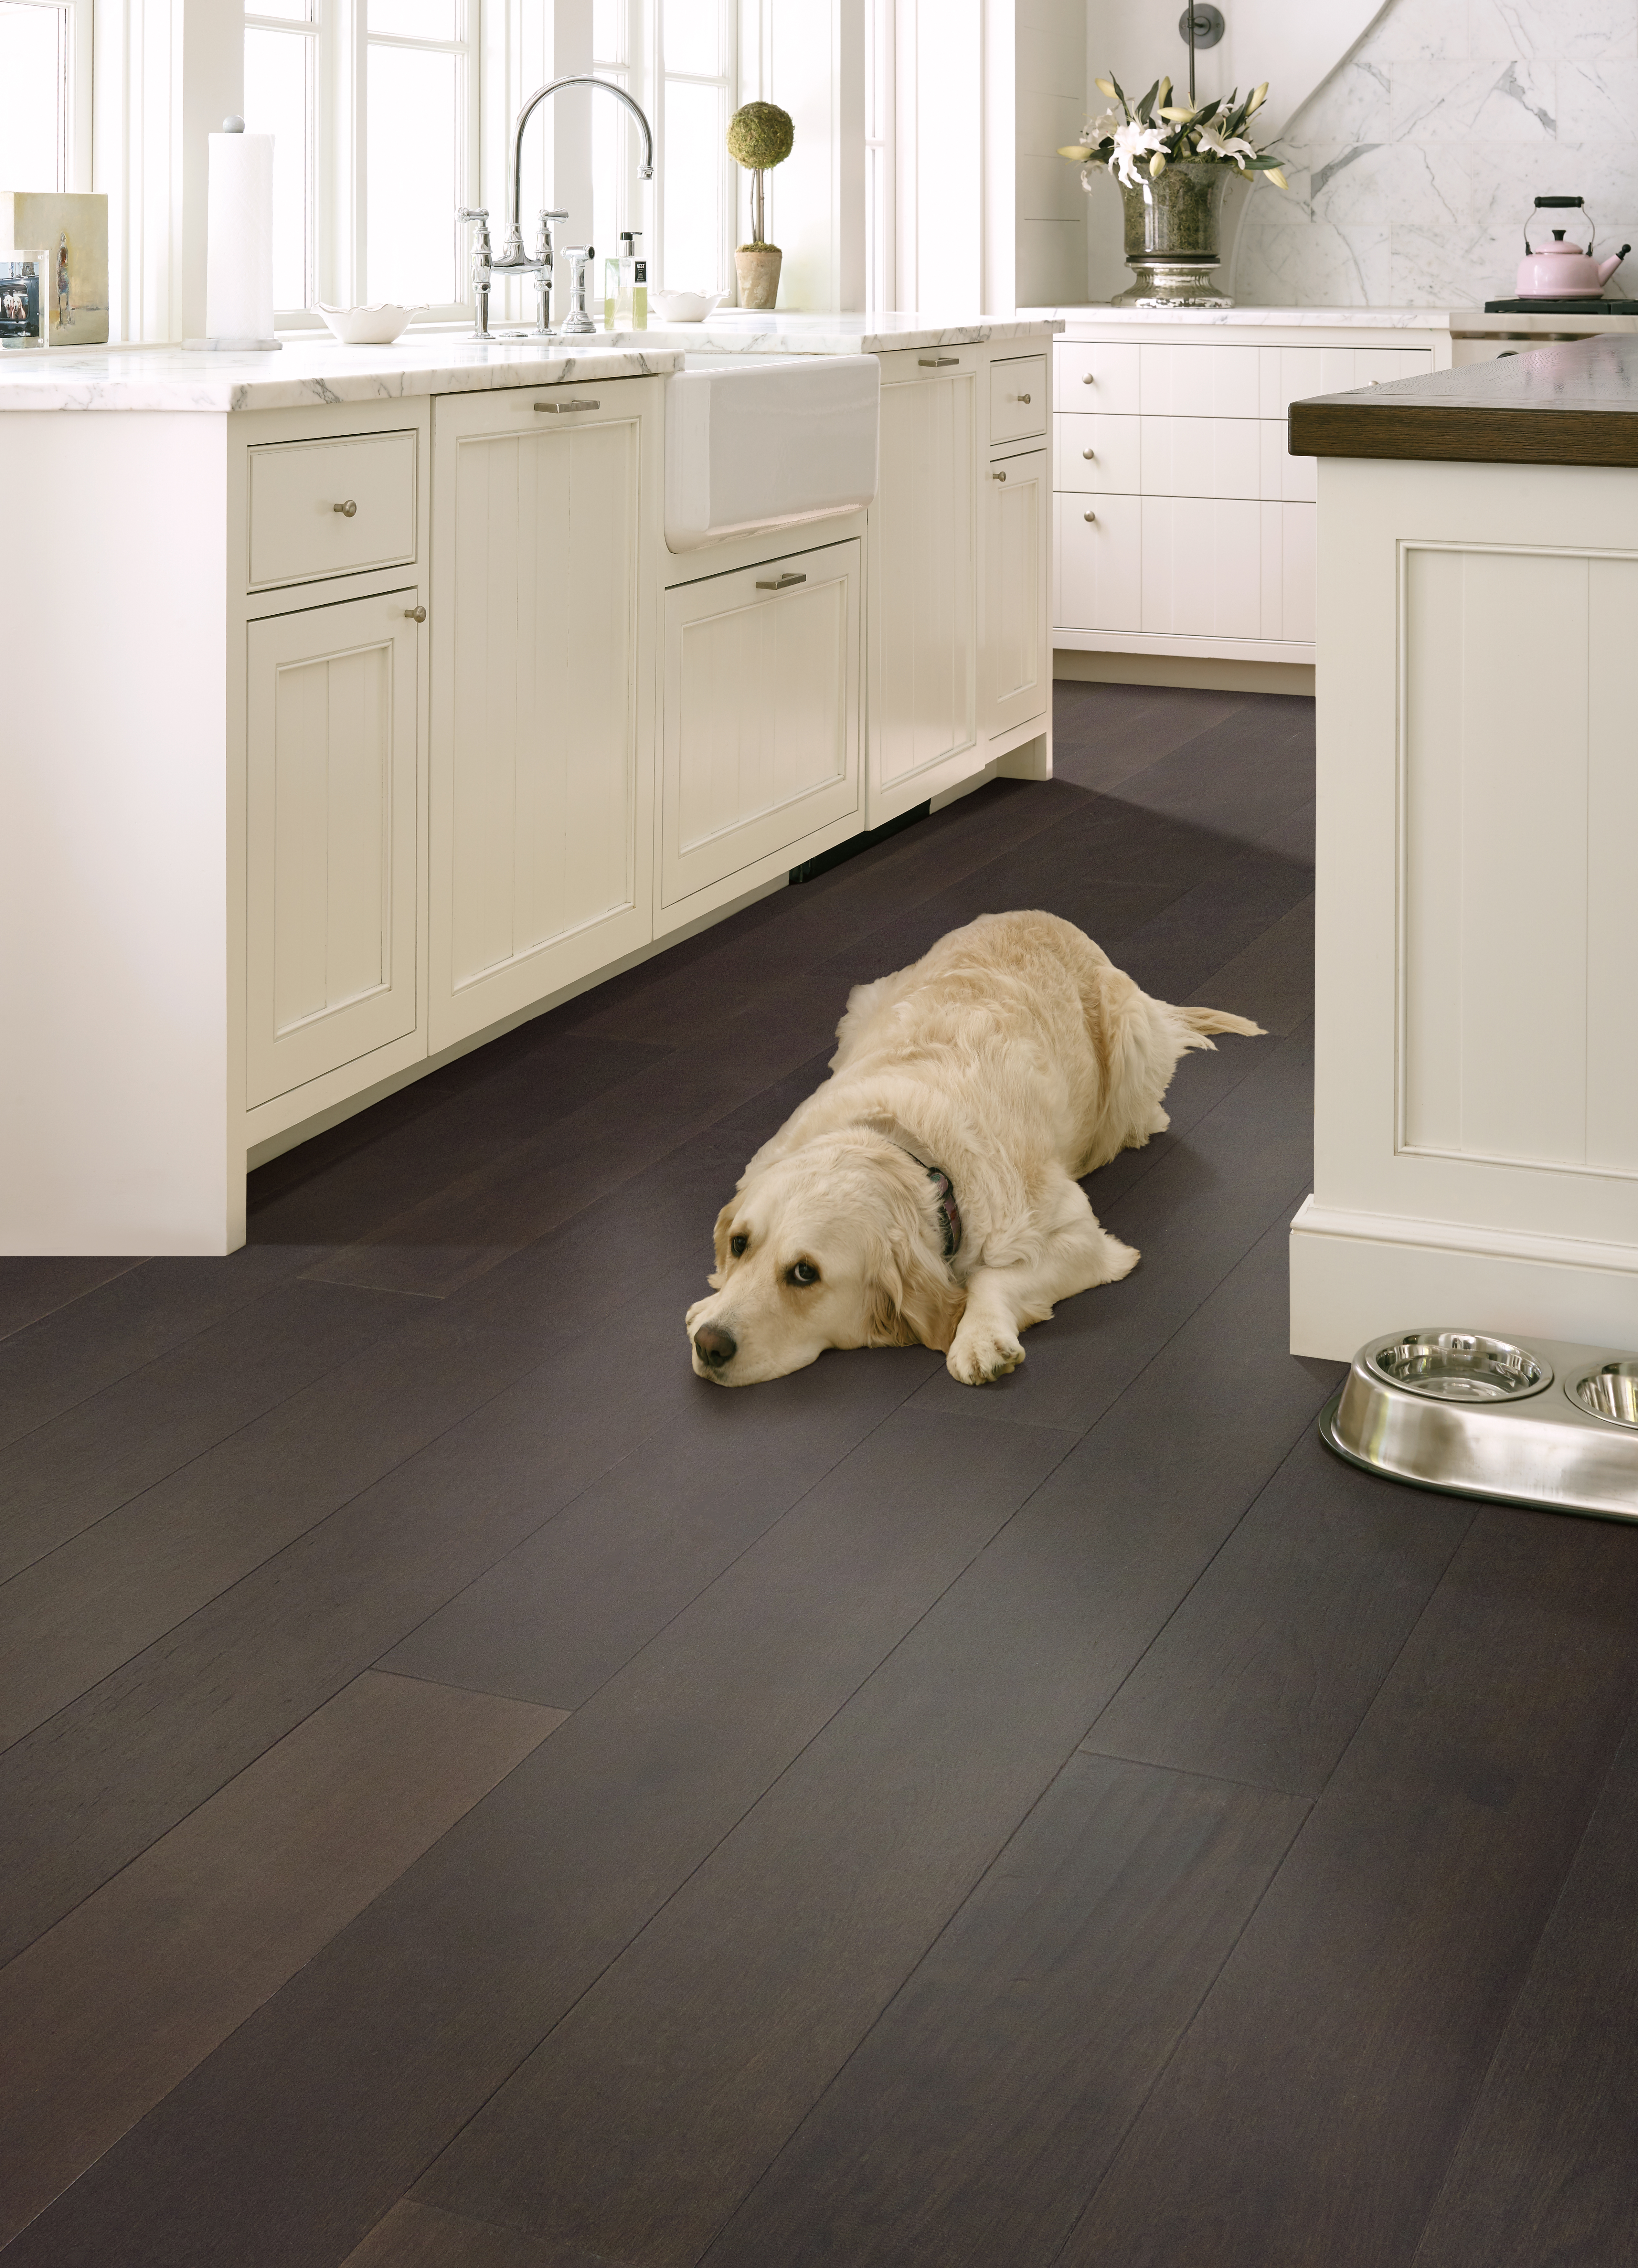 Hardwood flooring in a kitchen, installation services available. 